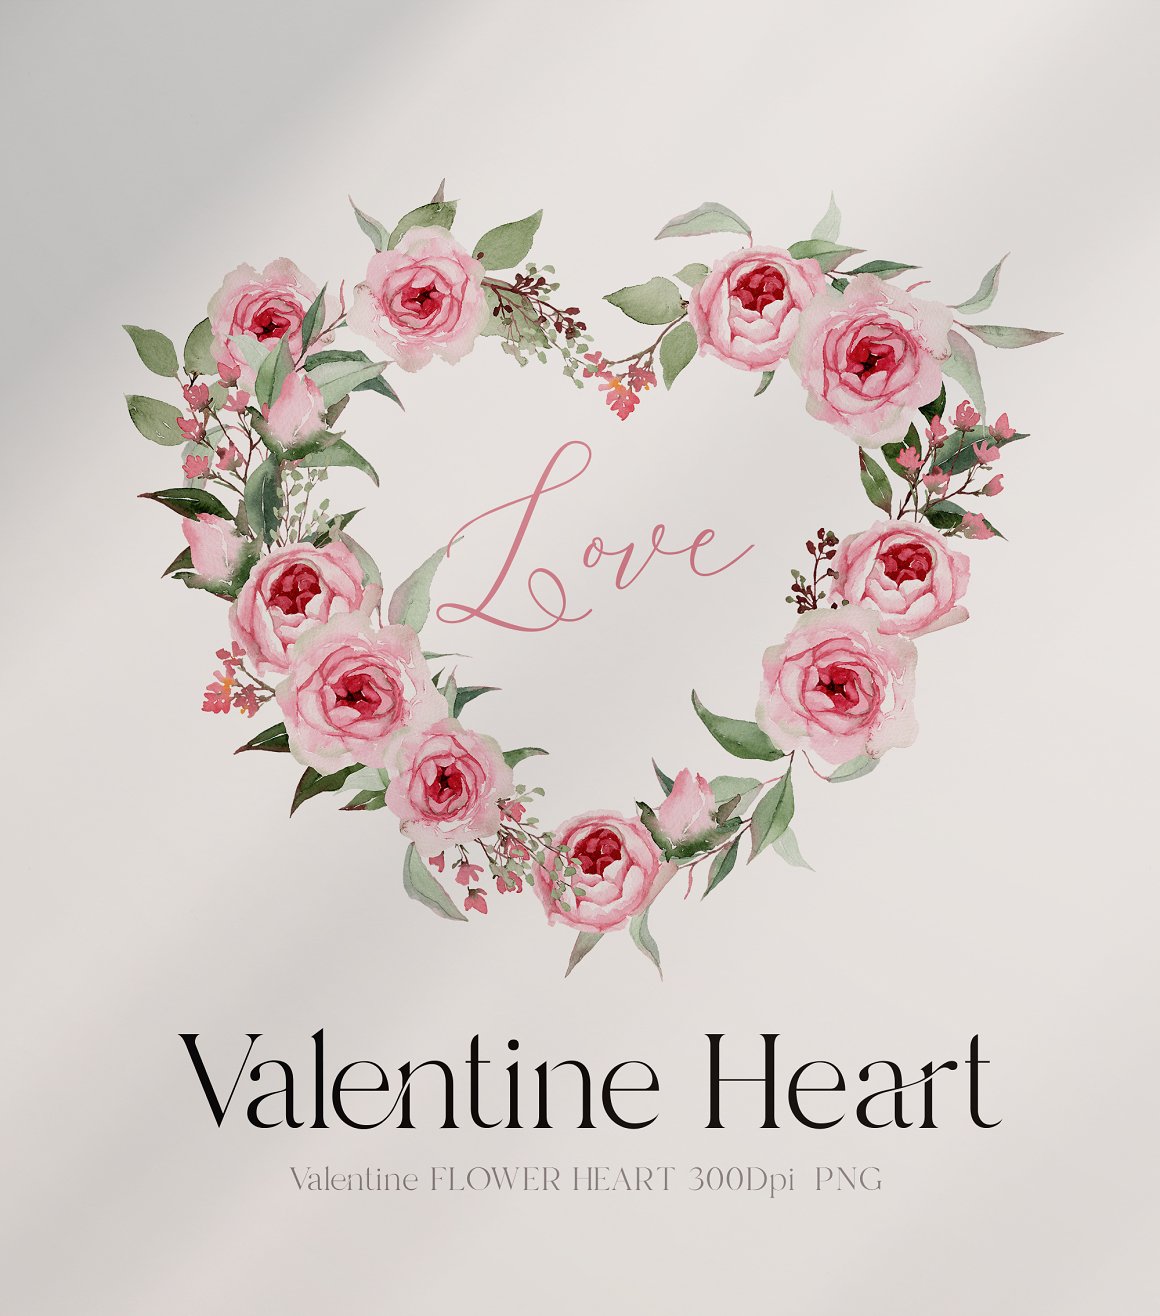 Black lettering "Valentine Heart" and heart of flowers and pink lettering "LOVE" in the centre .